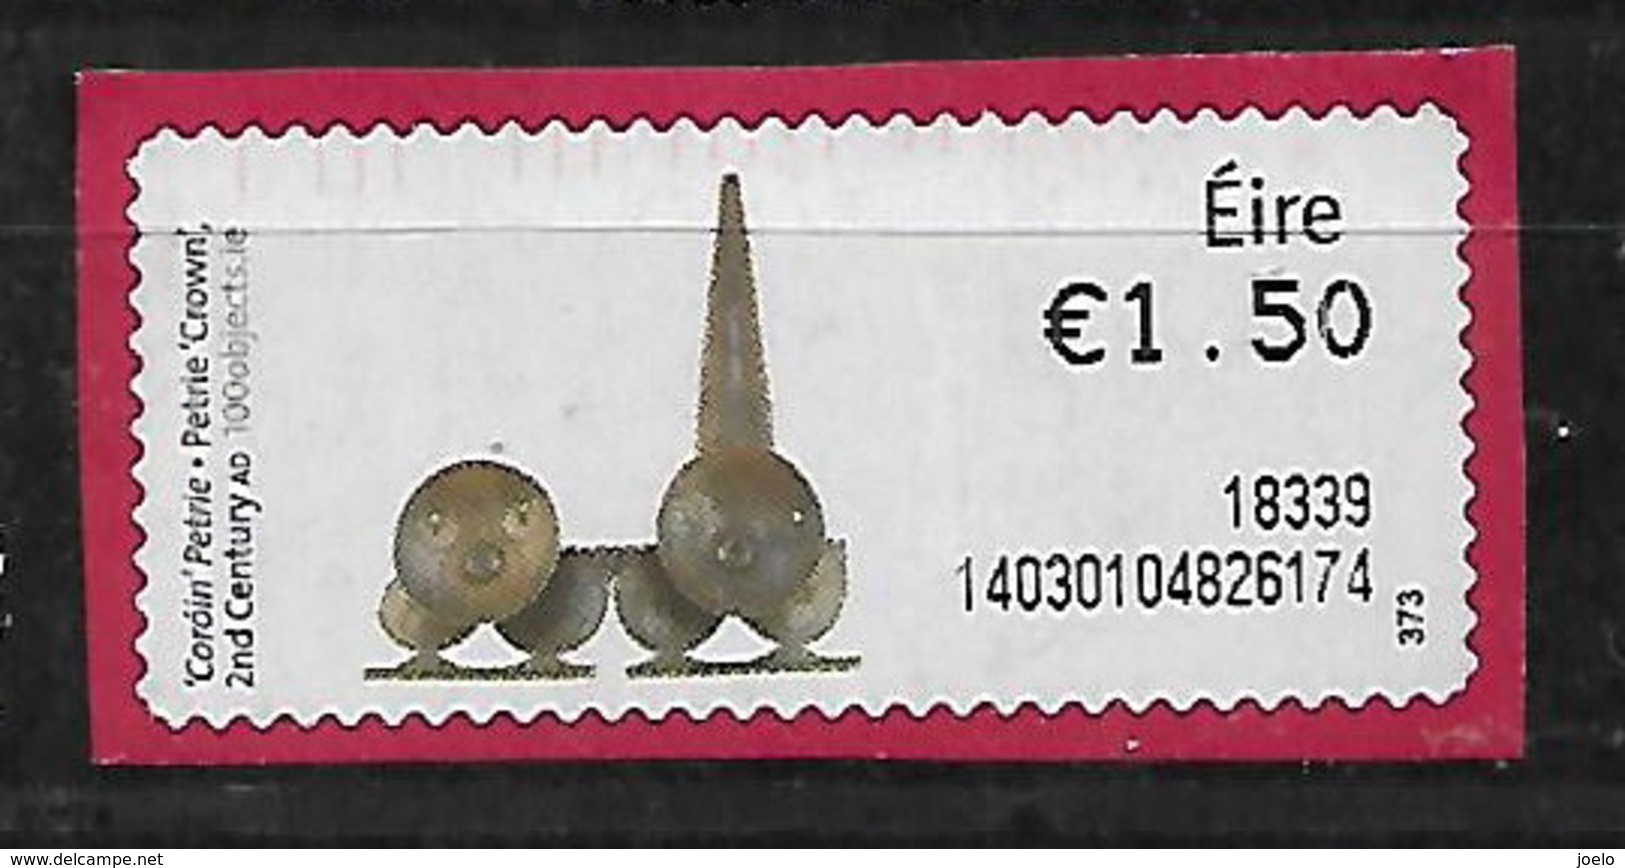 IRELAND 2018 FRANKING LABEL ANTIQUE OBJECTS PAIR - Franking Labels